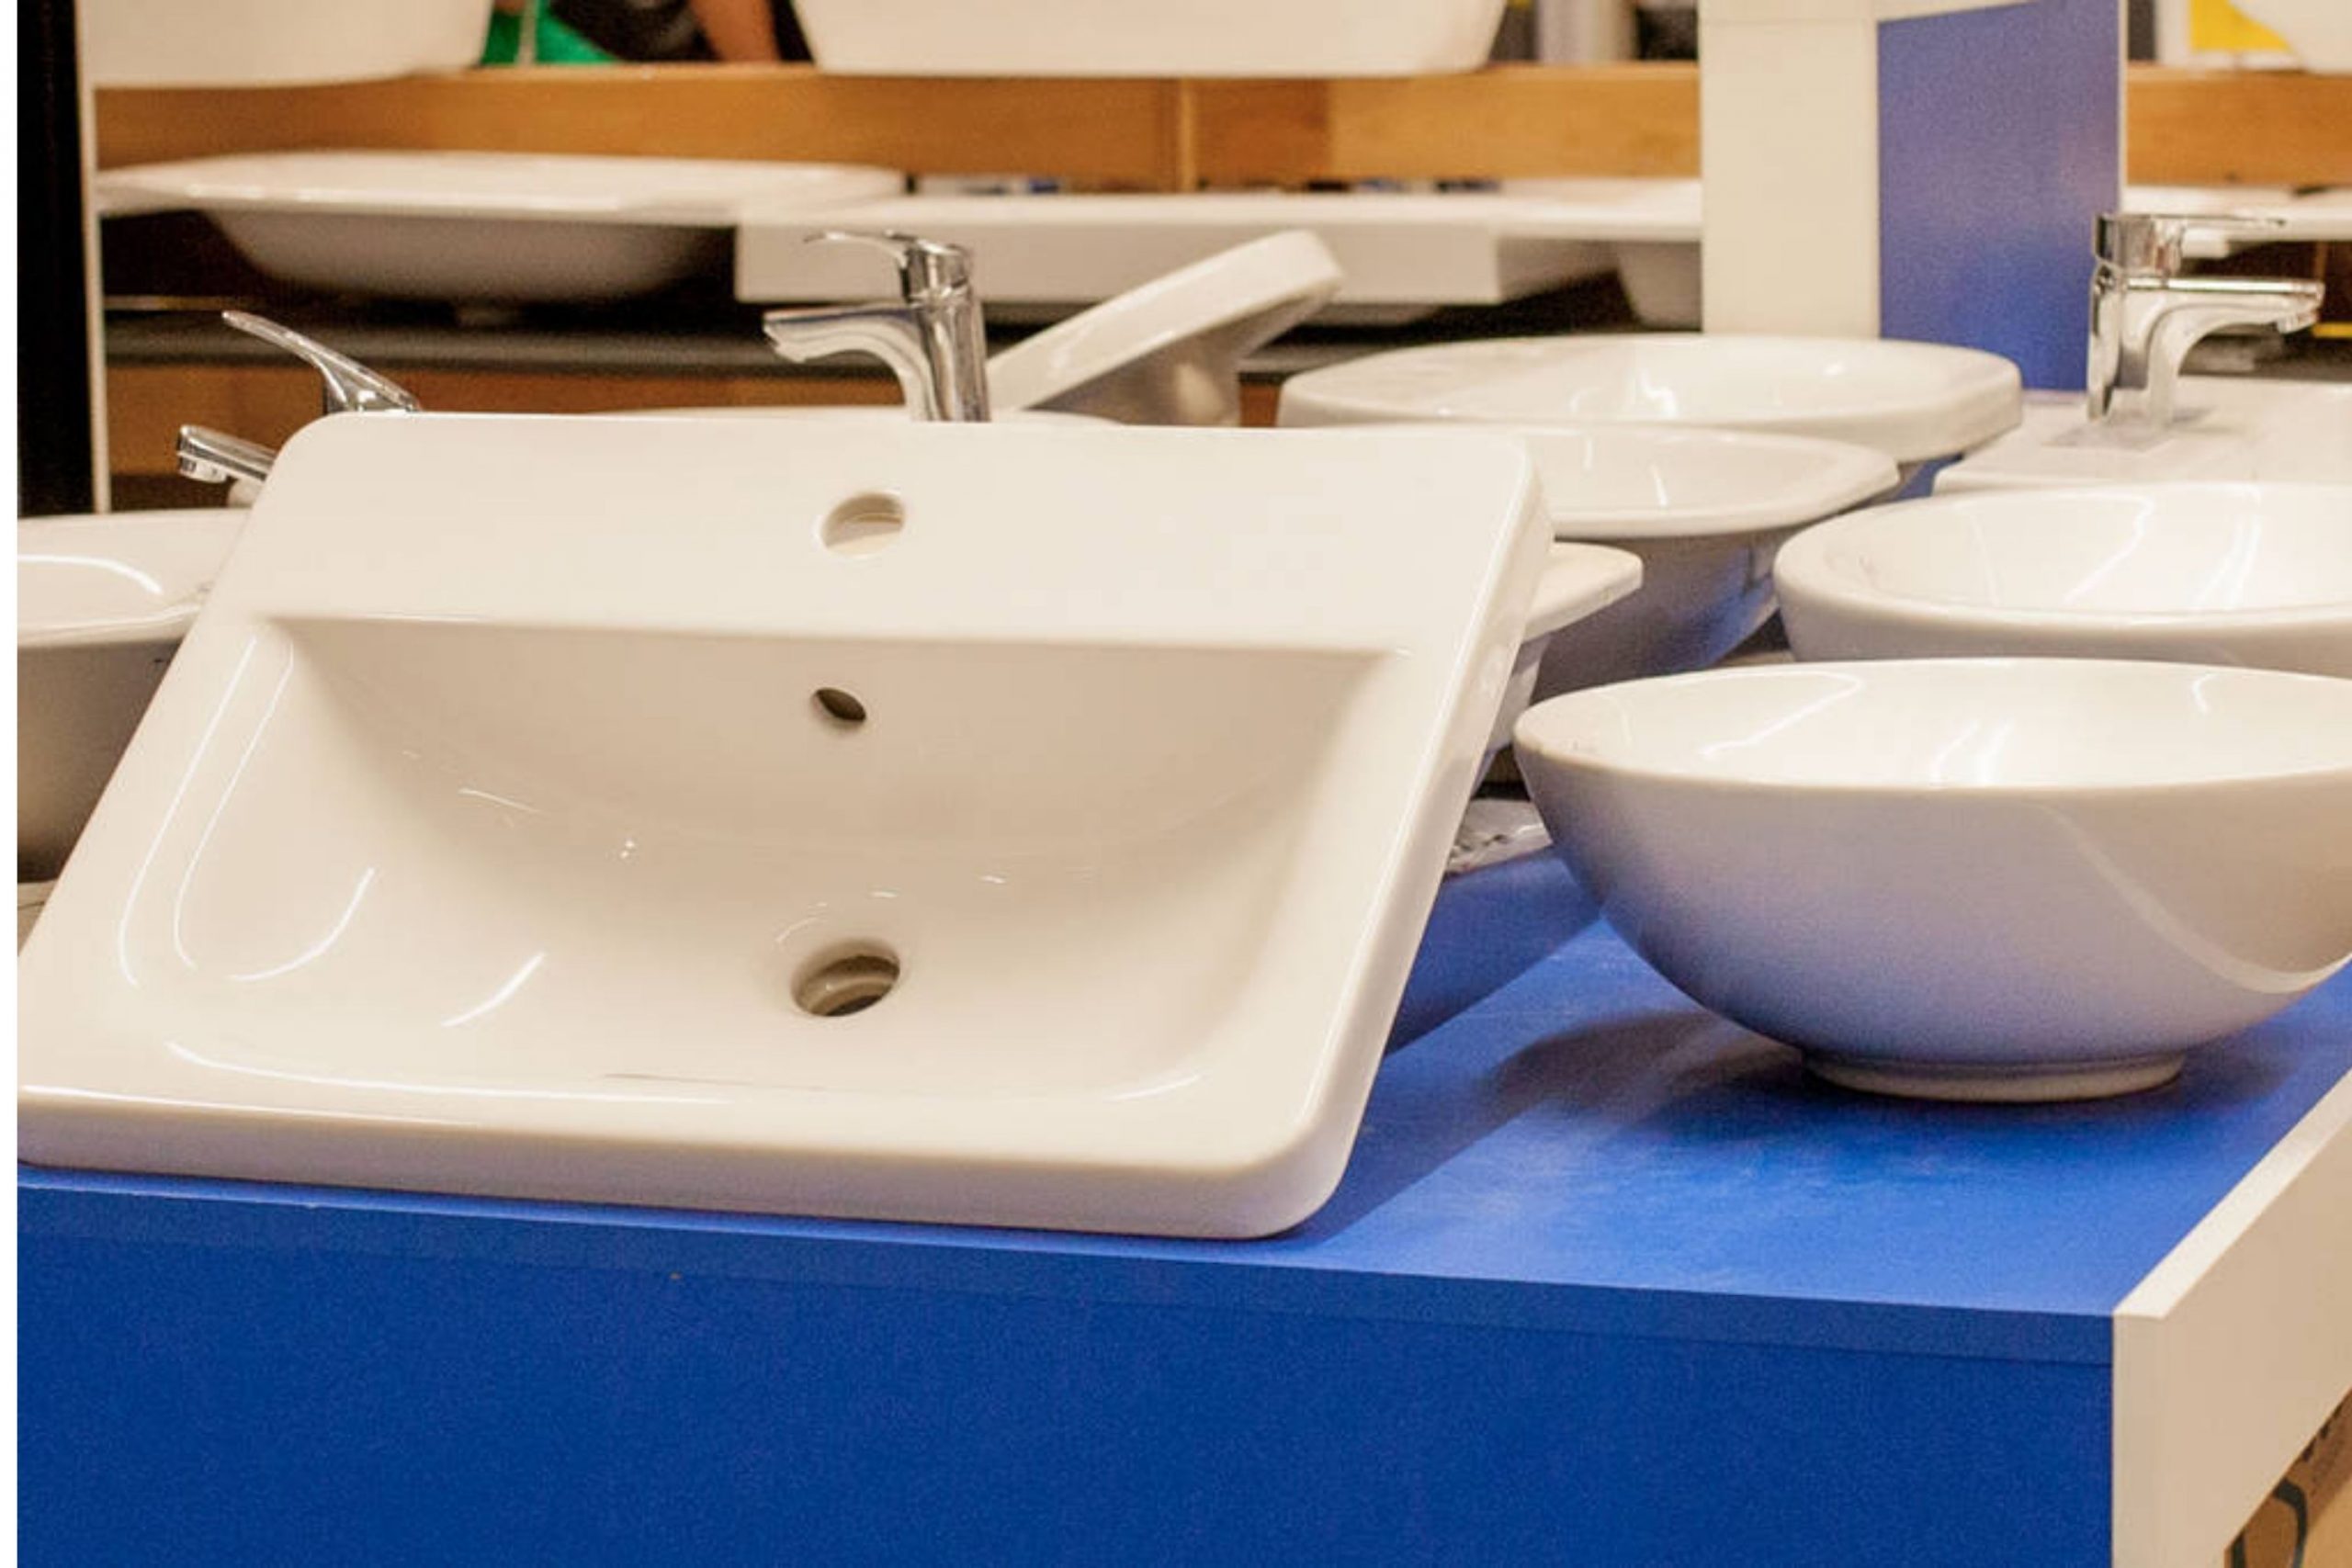 How to Paint a Design On a Porcelain Sink